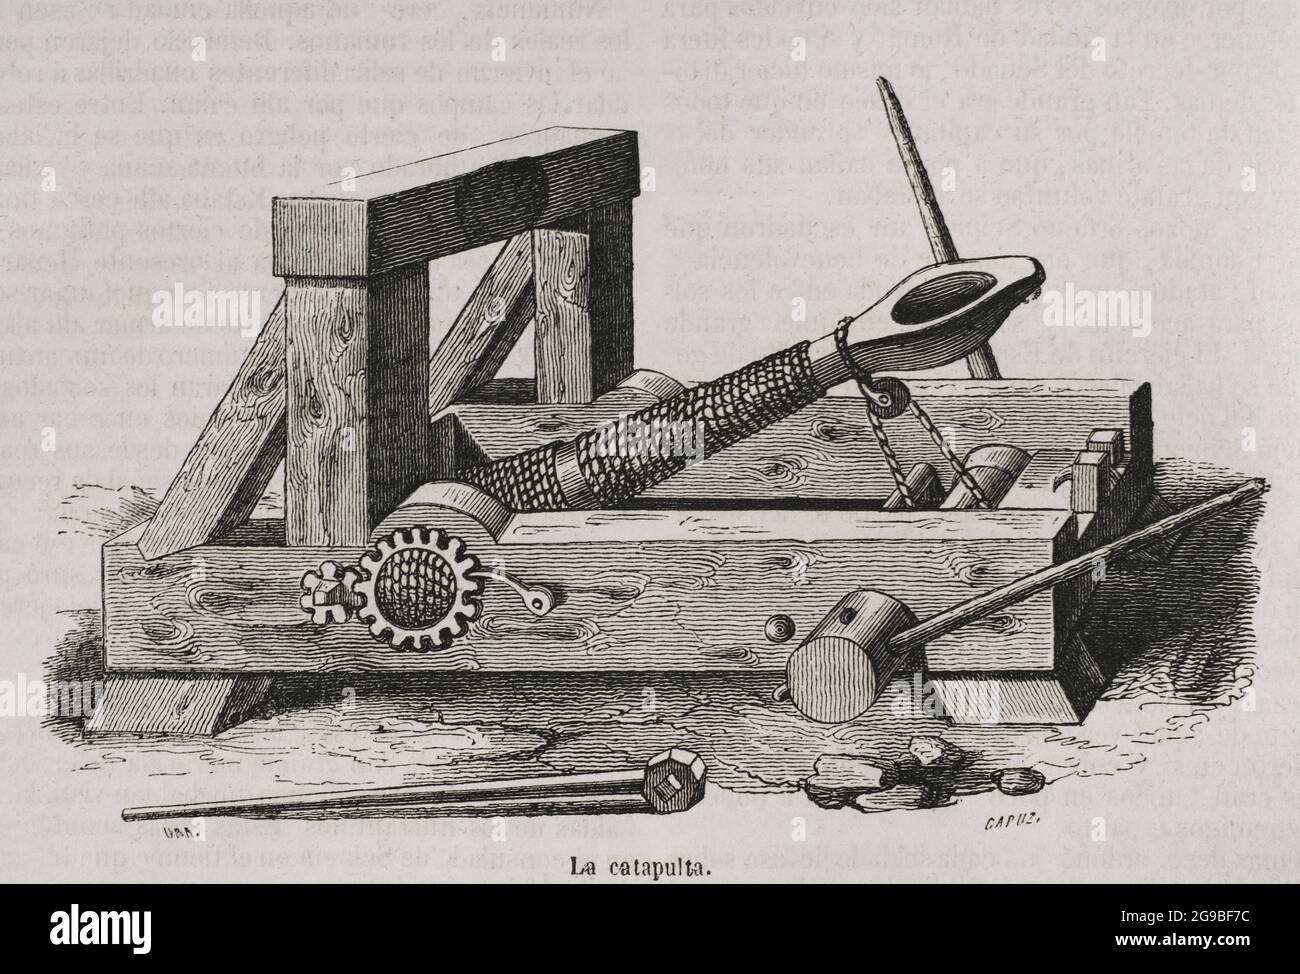 Ancient History. The catapult. Siege machine used to throw objects from a distance as projectiles. Engraving by Capuz. Historia General de España by Father Mariana. Madrid, 1852. Author: Tomas Carlos Capuz (1834-1899). Spanish engraver and xylograph. Stock Photo